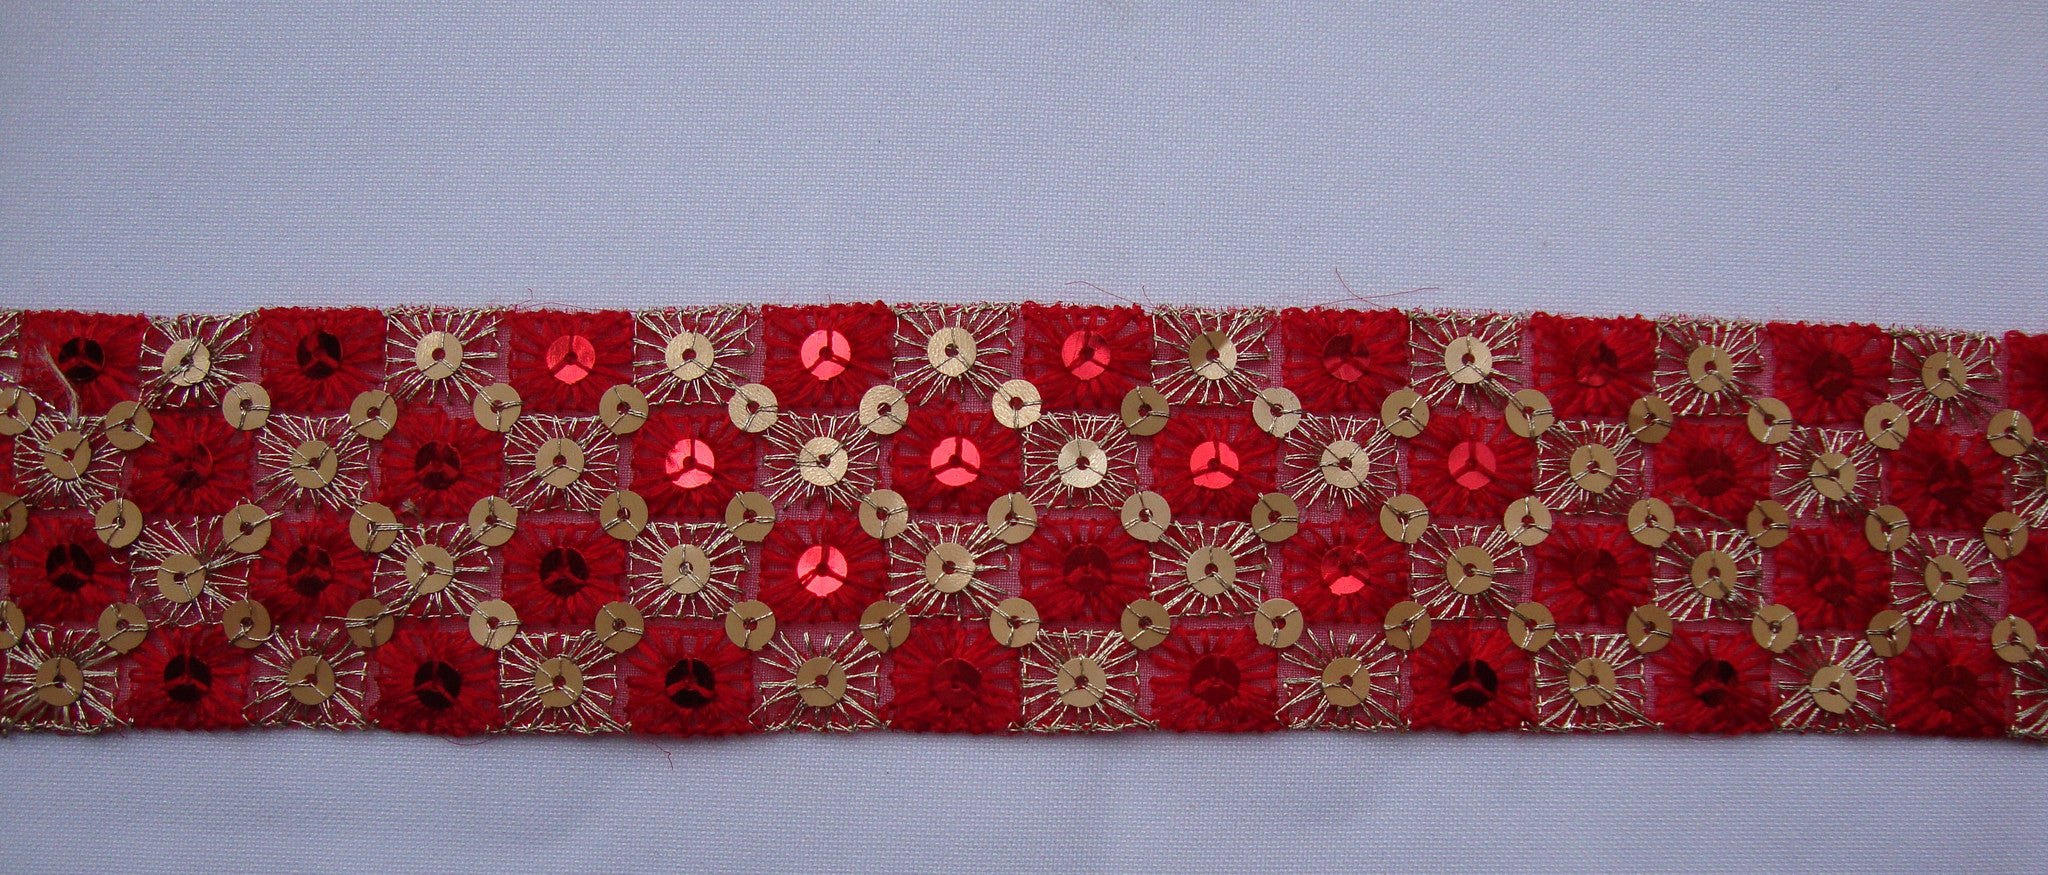 Red Sequin Trimming (Sold as a 2 yard piece)